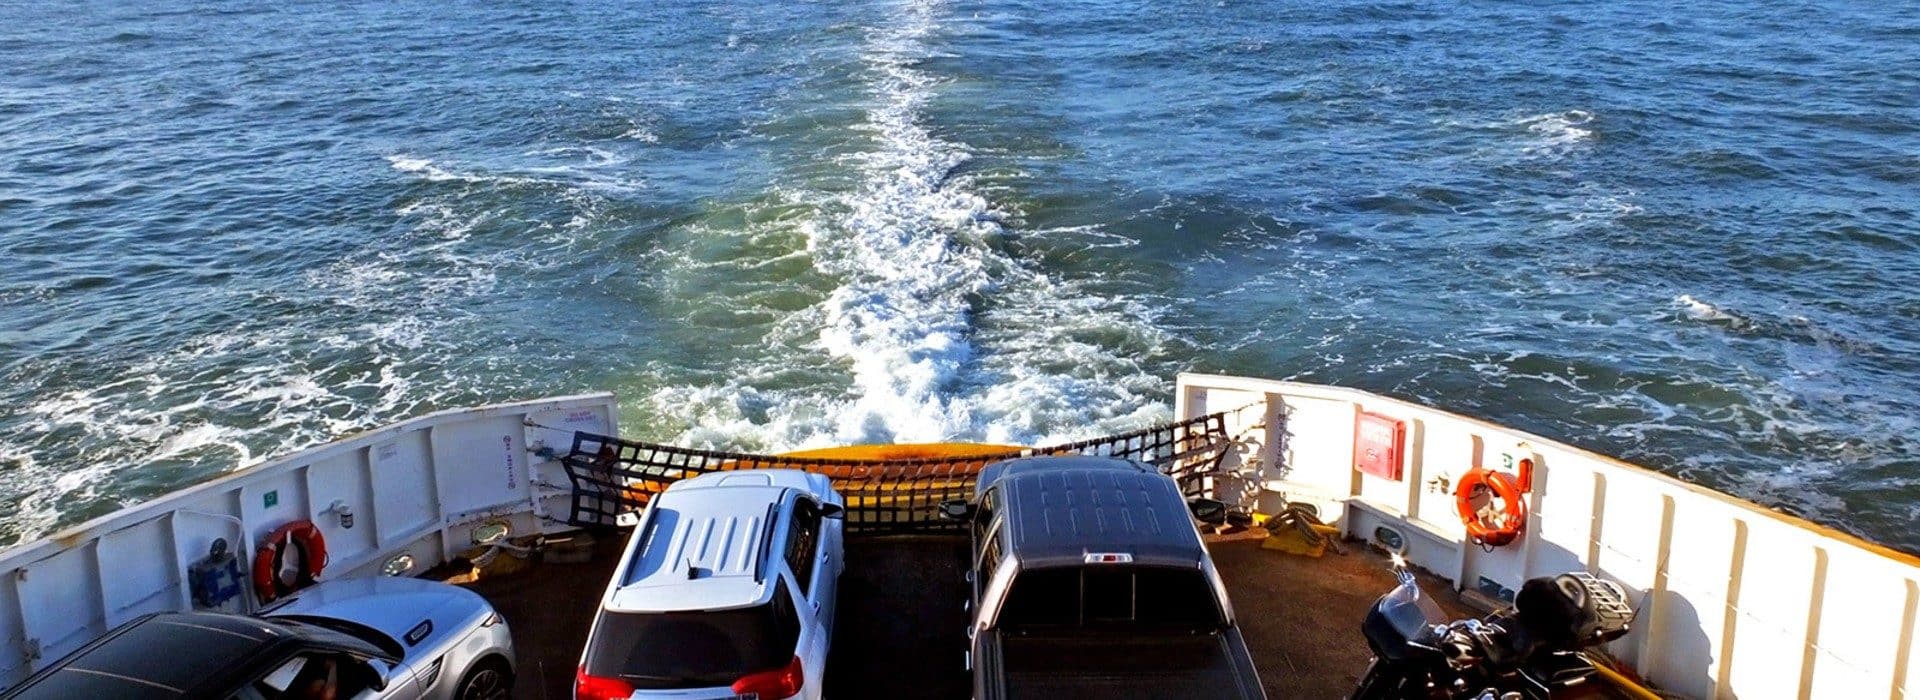 back of a ferry with cars on it